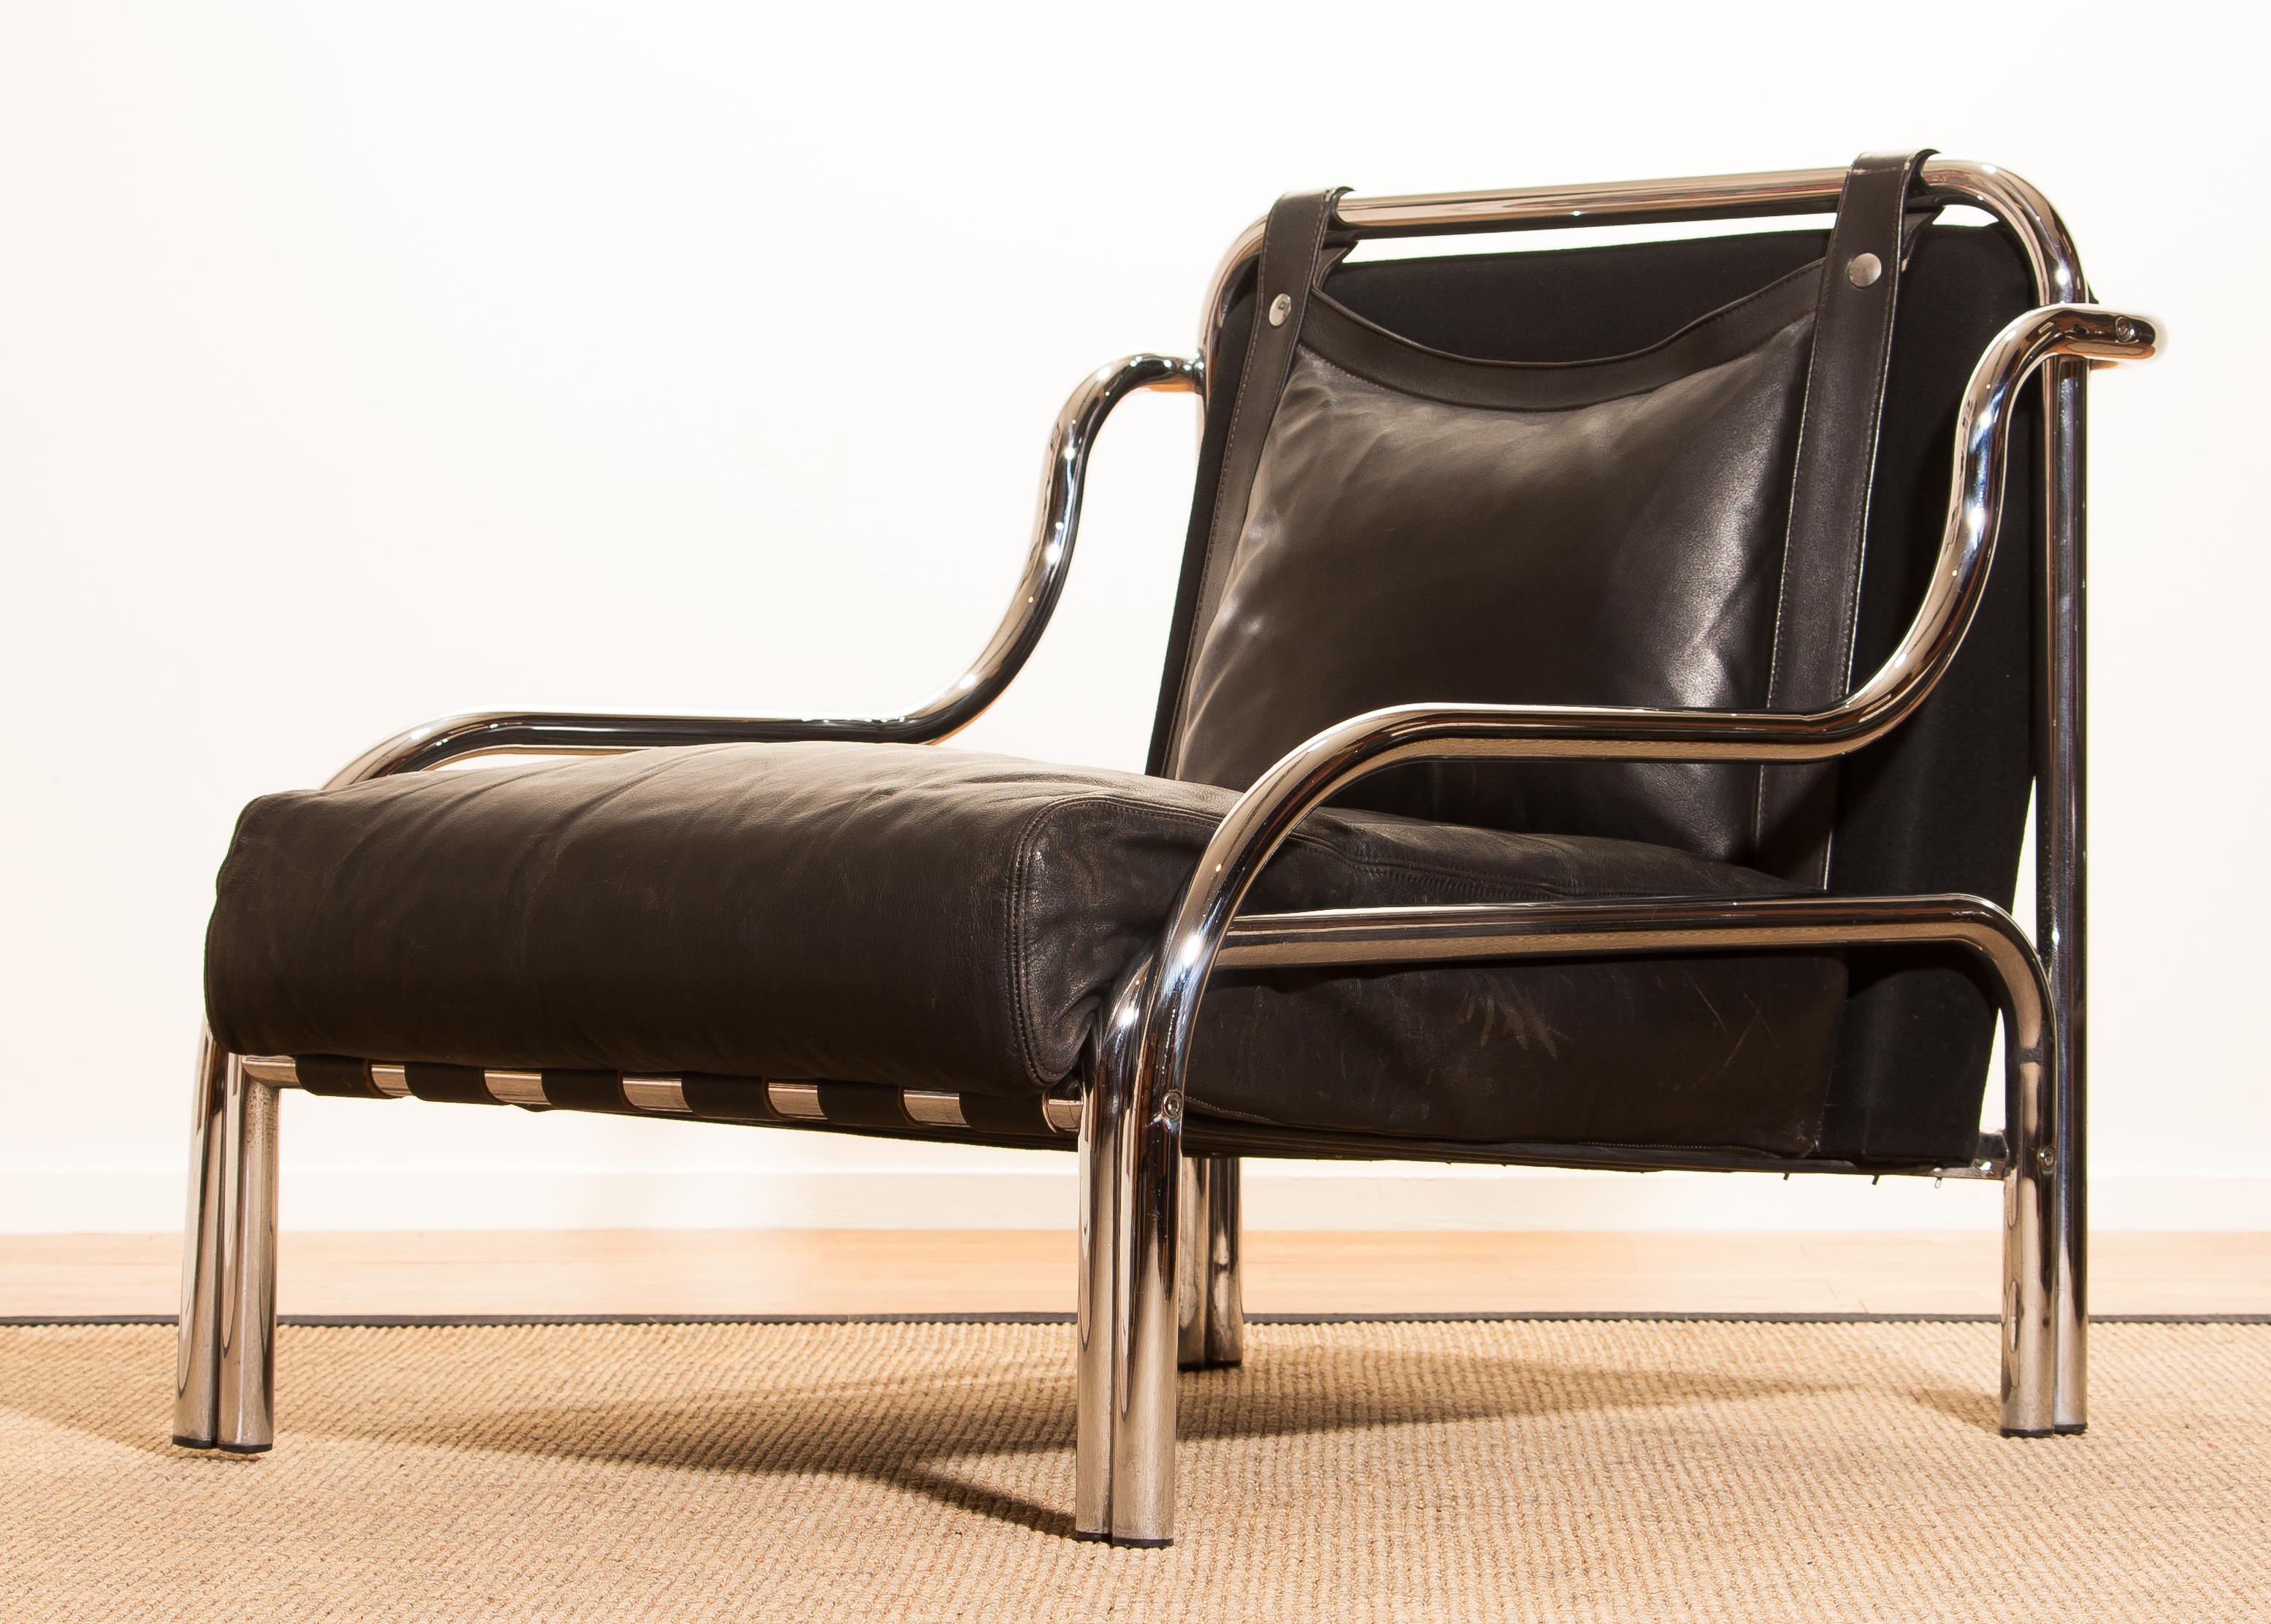 Wonderful lounge set designed by Gae Aulenti for Poltronova Italy.
This beautiful set consists of a sofa and chair made of a black leather seating on a chromed frame.
It is in an excellent condition.
Period 1960s
Dimensions: Sofa H.73 cm, W.130